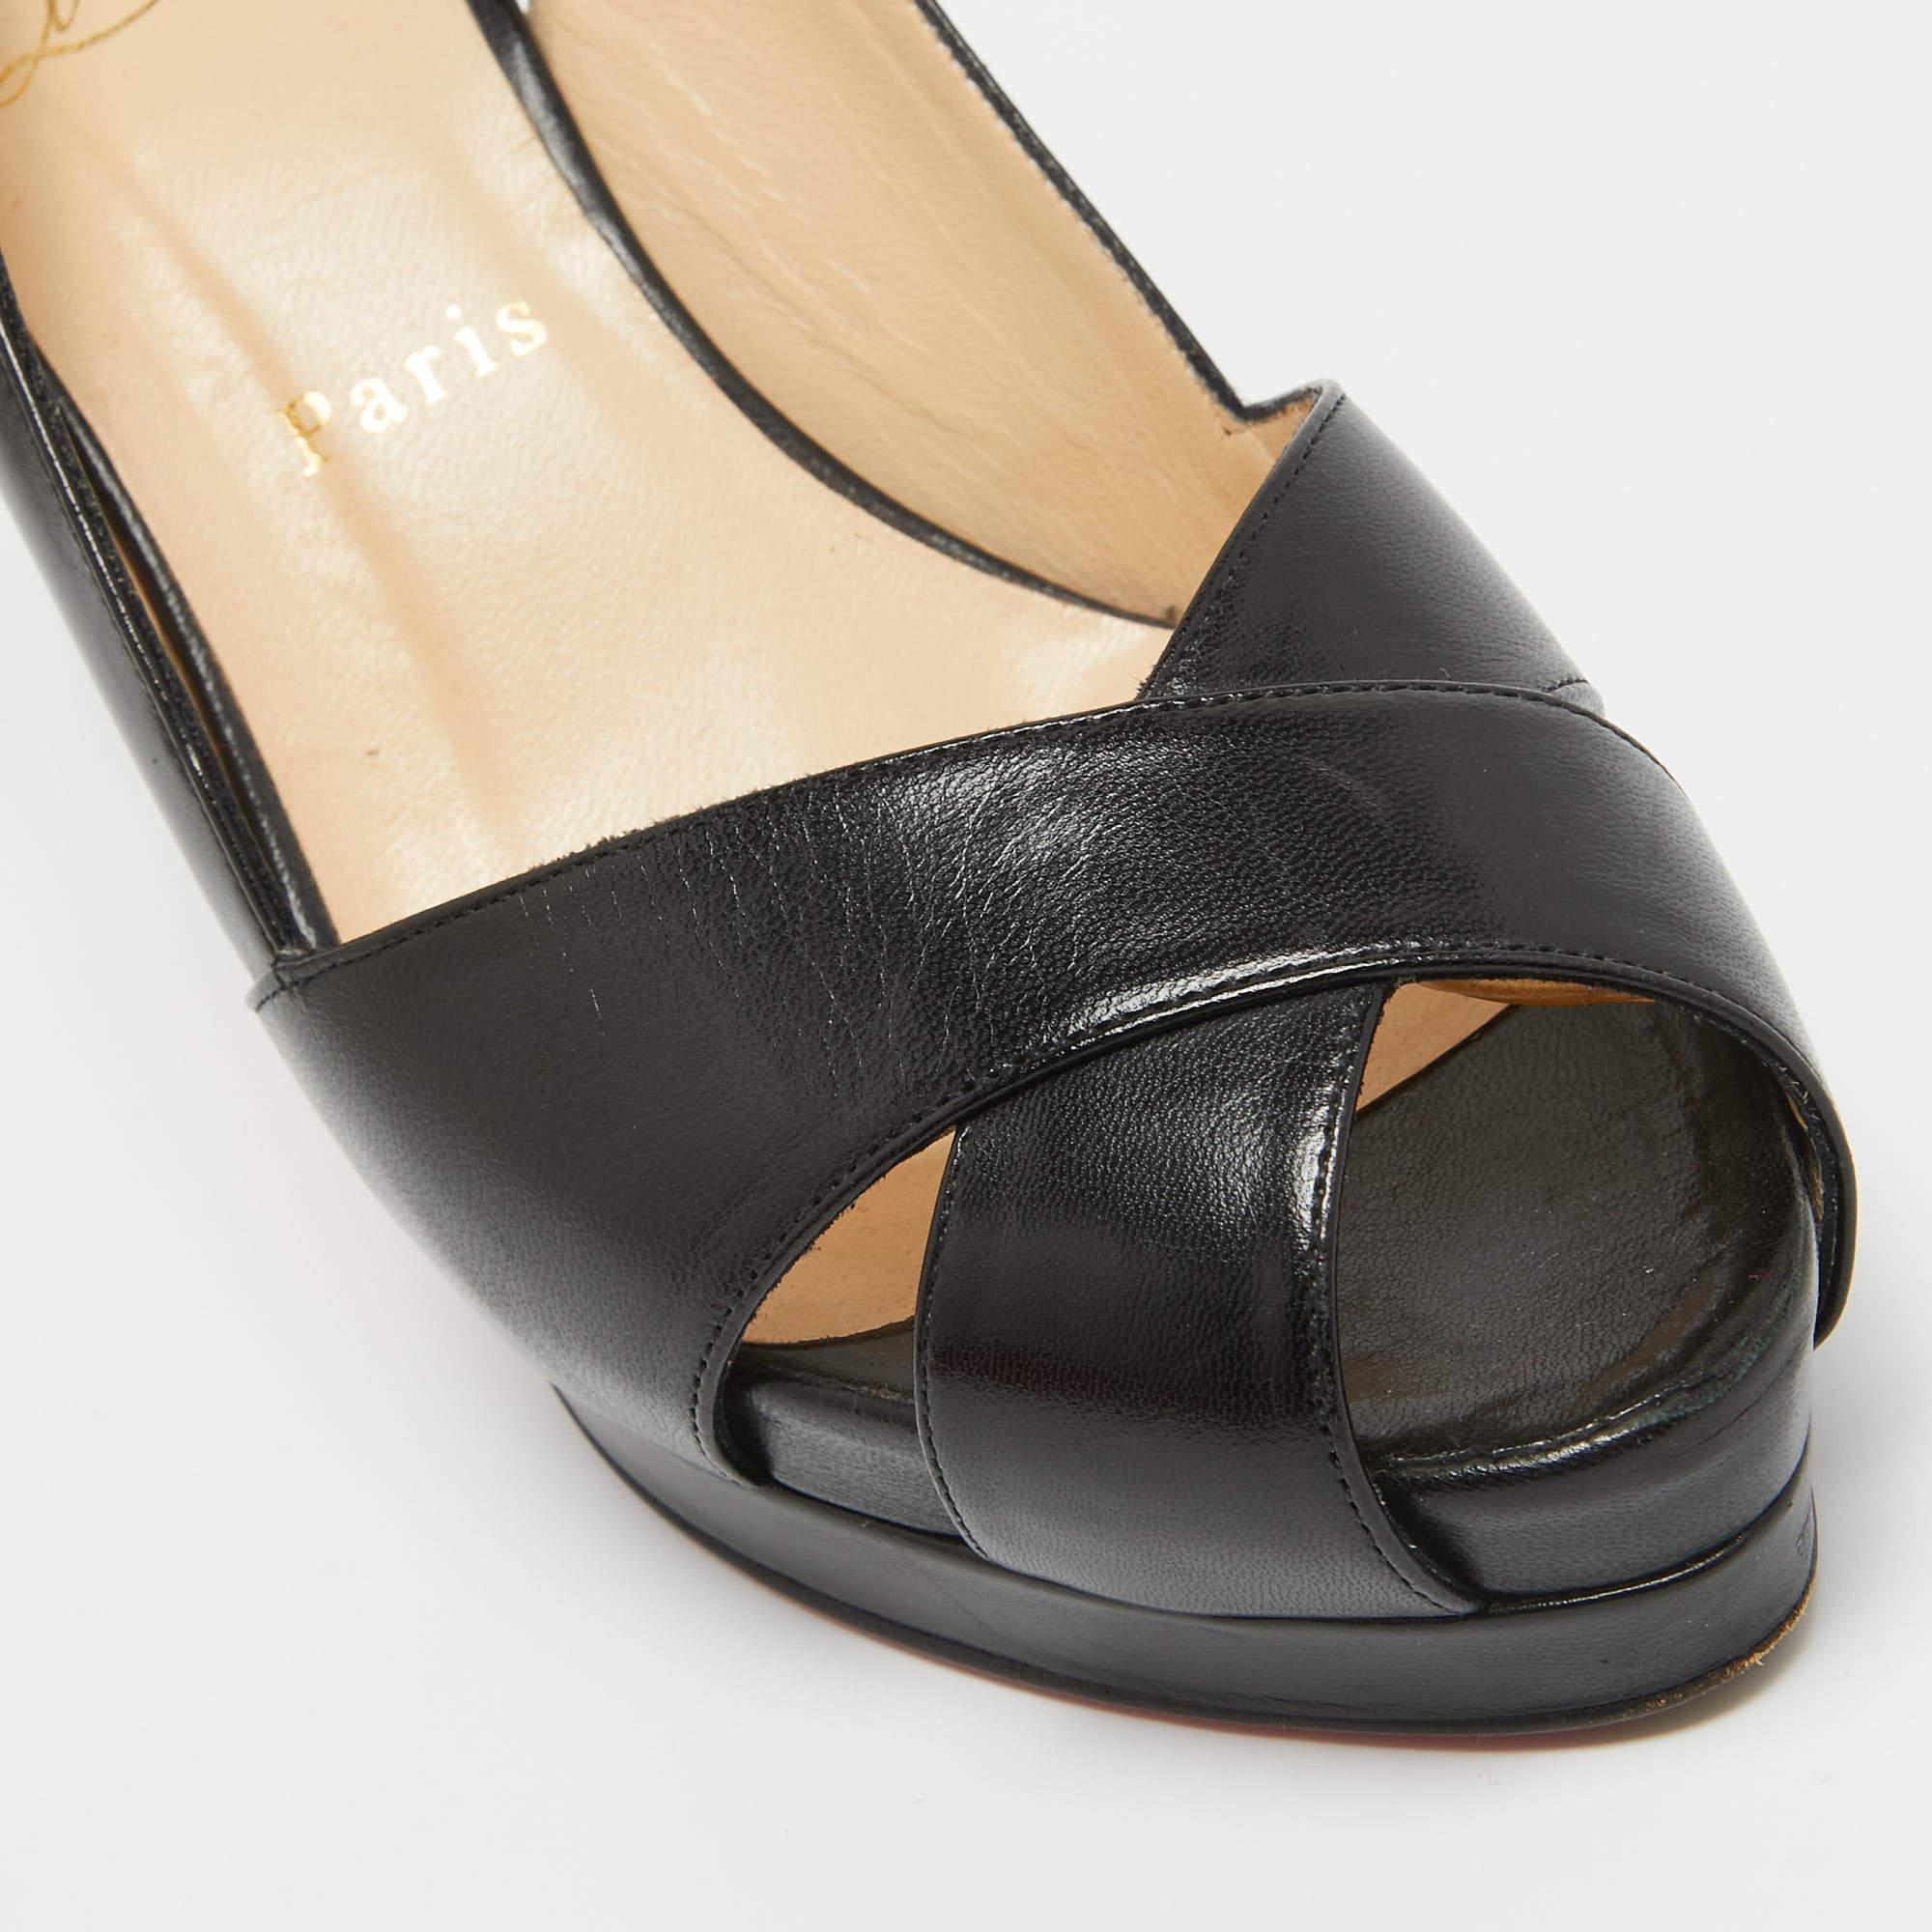 Christian Louboutin Black Leather Soso Slingback Pumps Size 38 For Sale 2